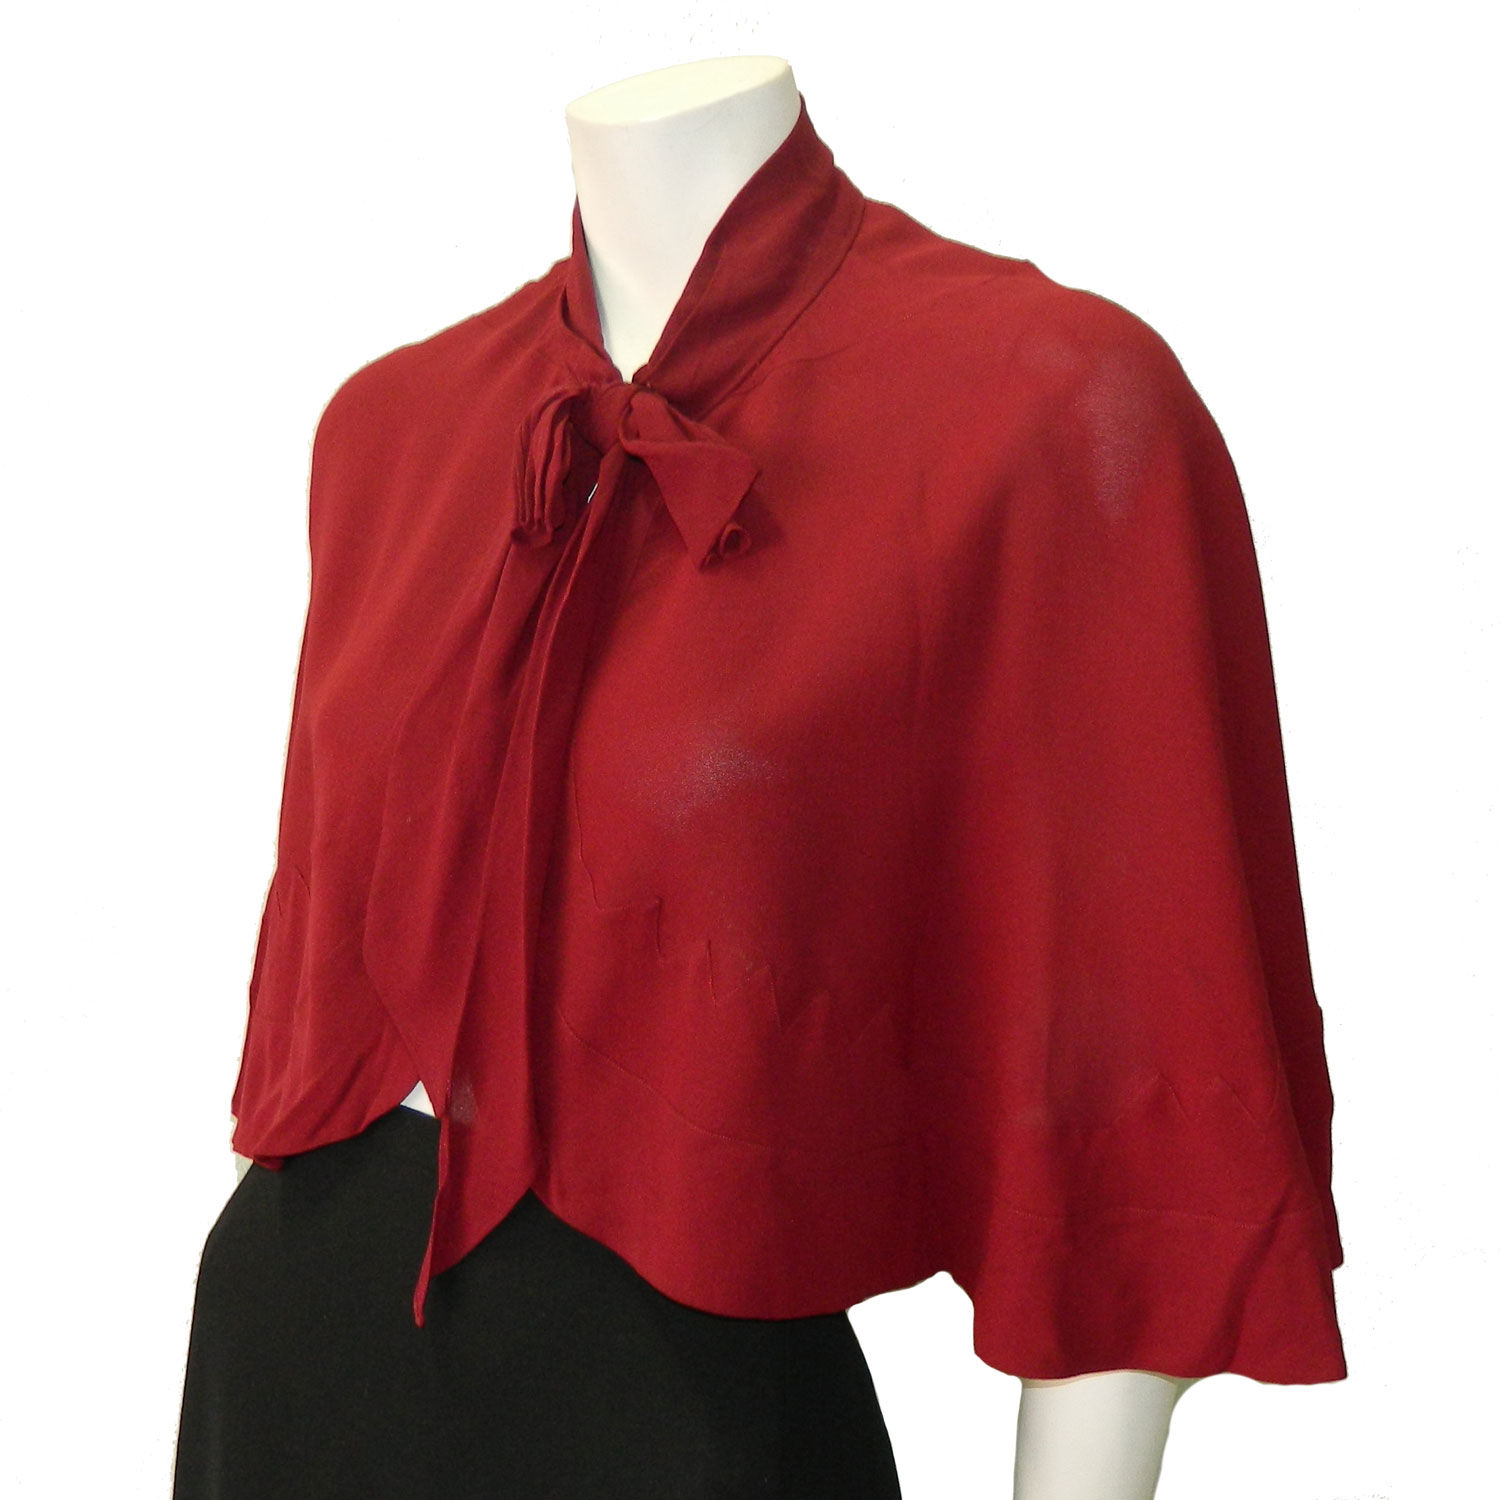 1930s rayon capelet